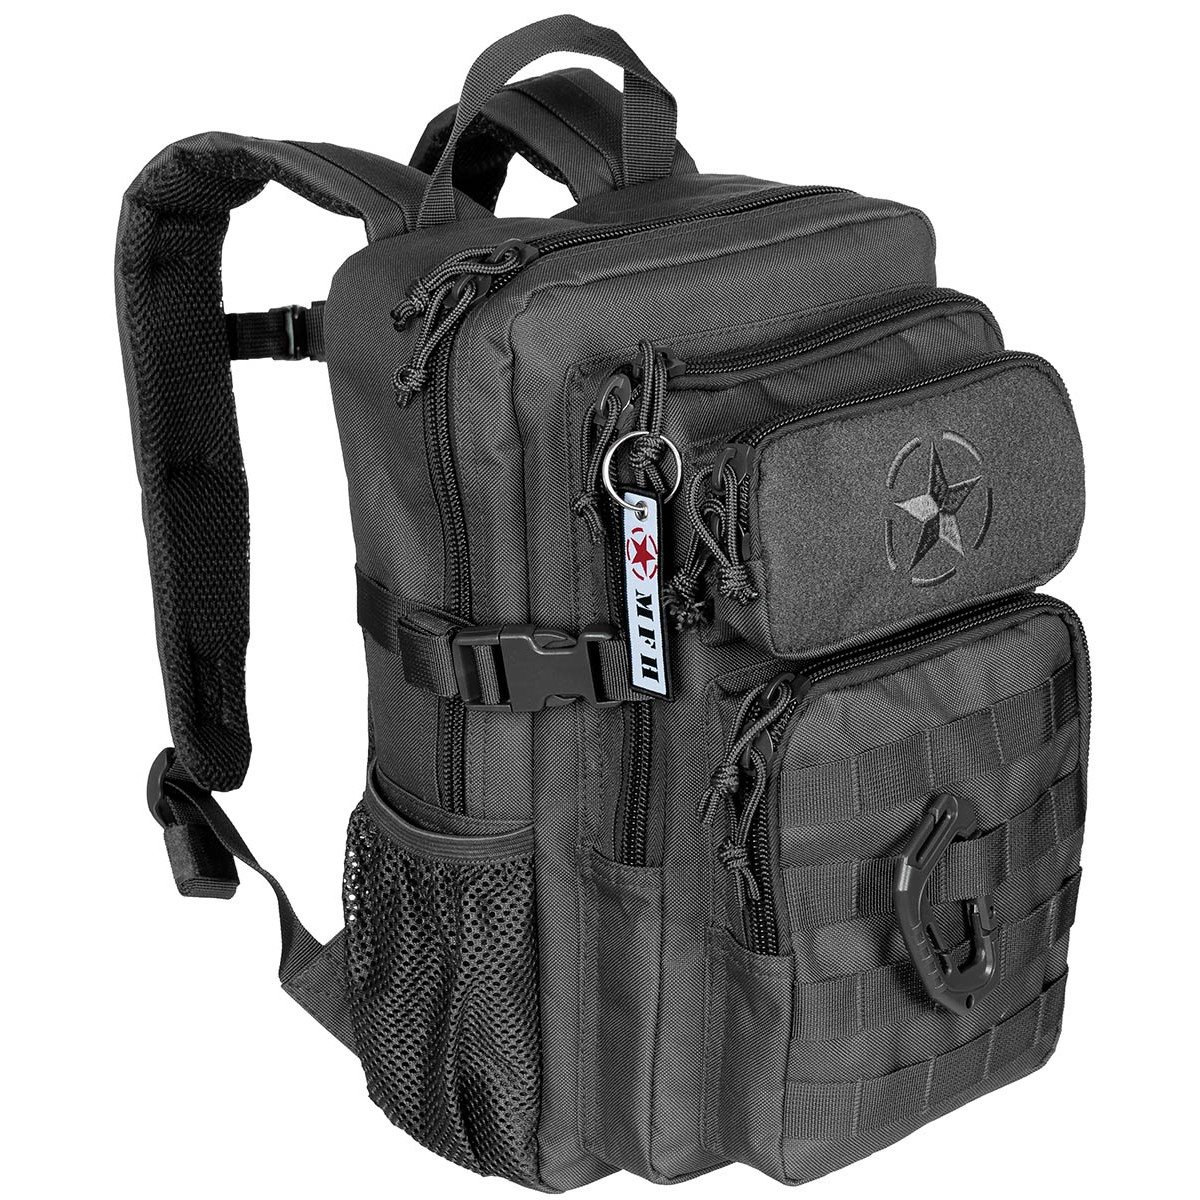 Backpack US ASSAULT YOUNGSTER BLACK MFH Defence 30330A L-11